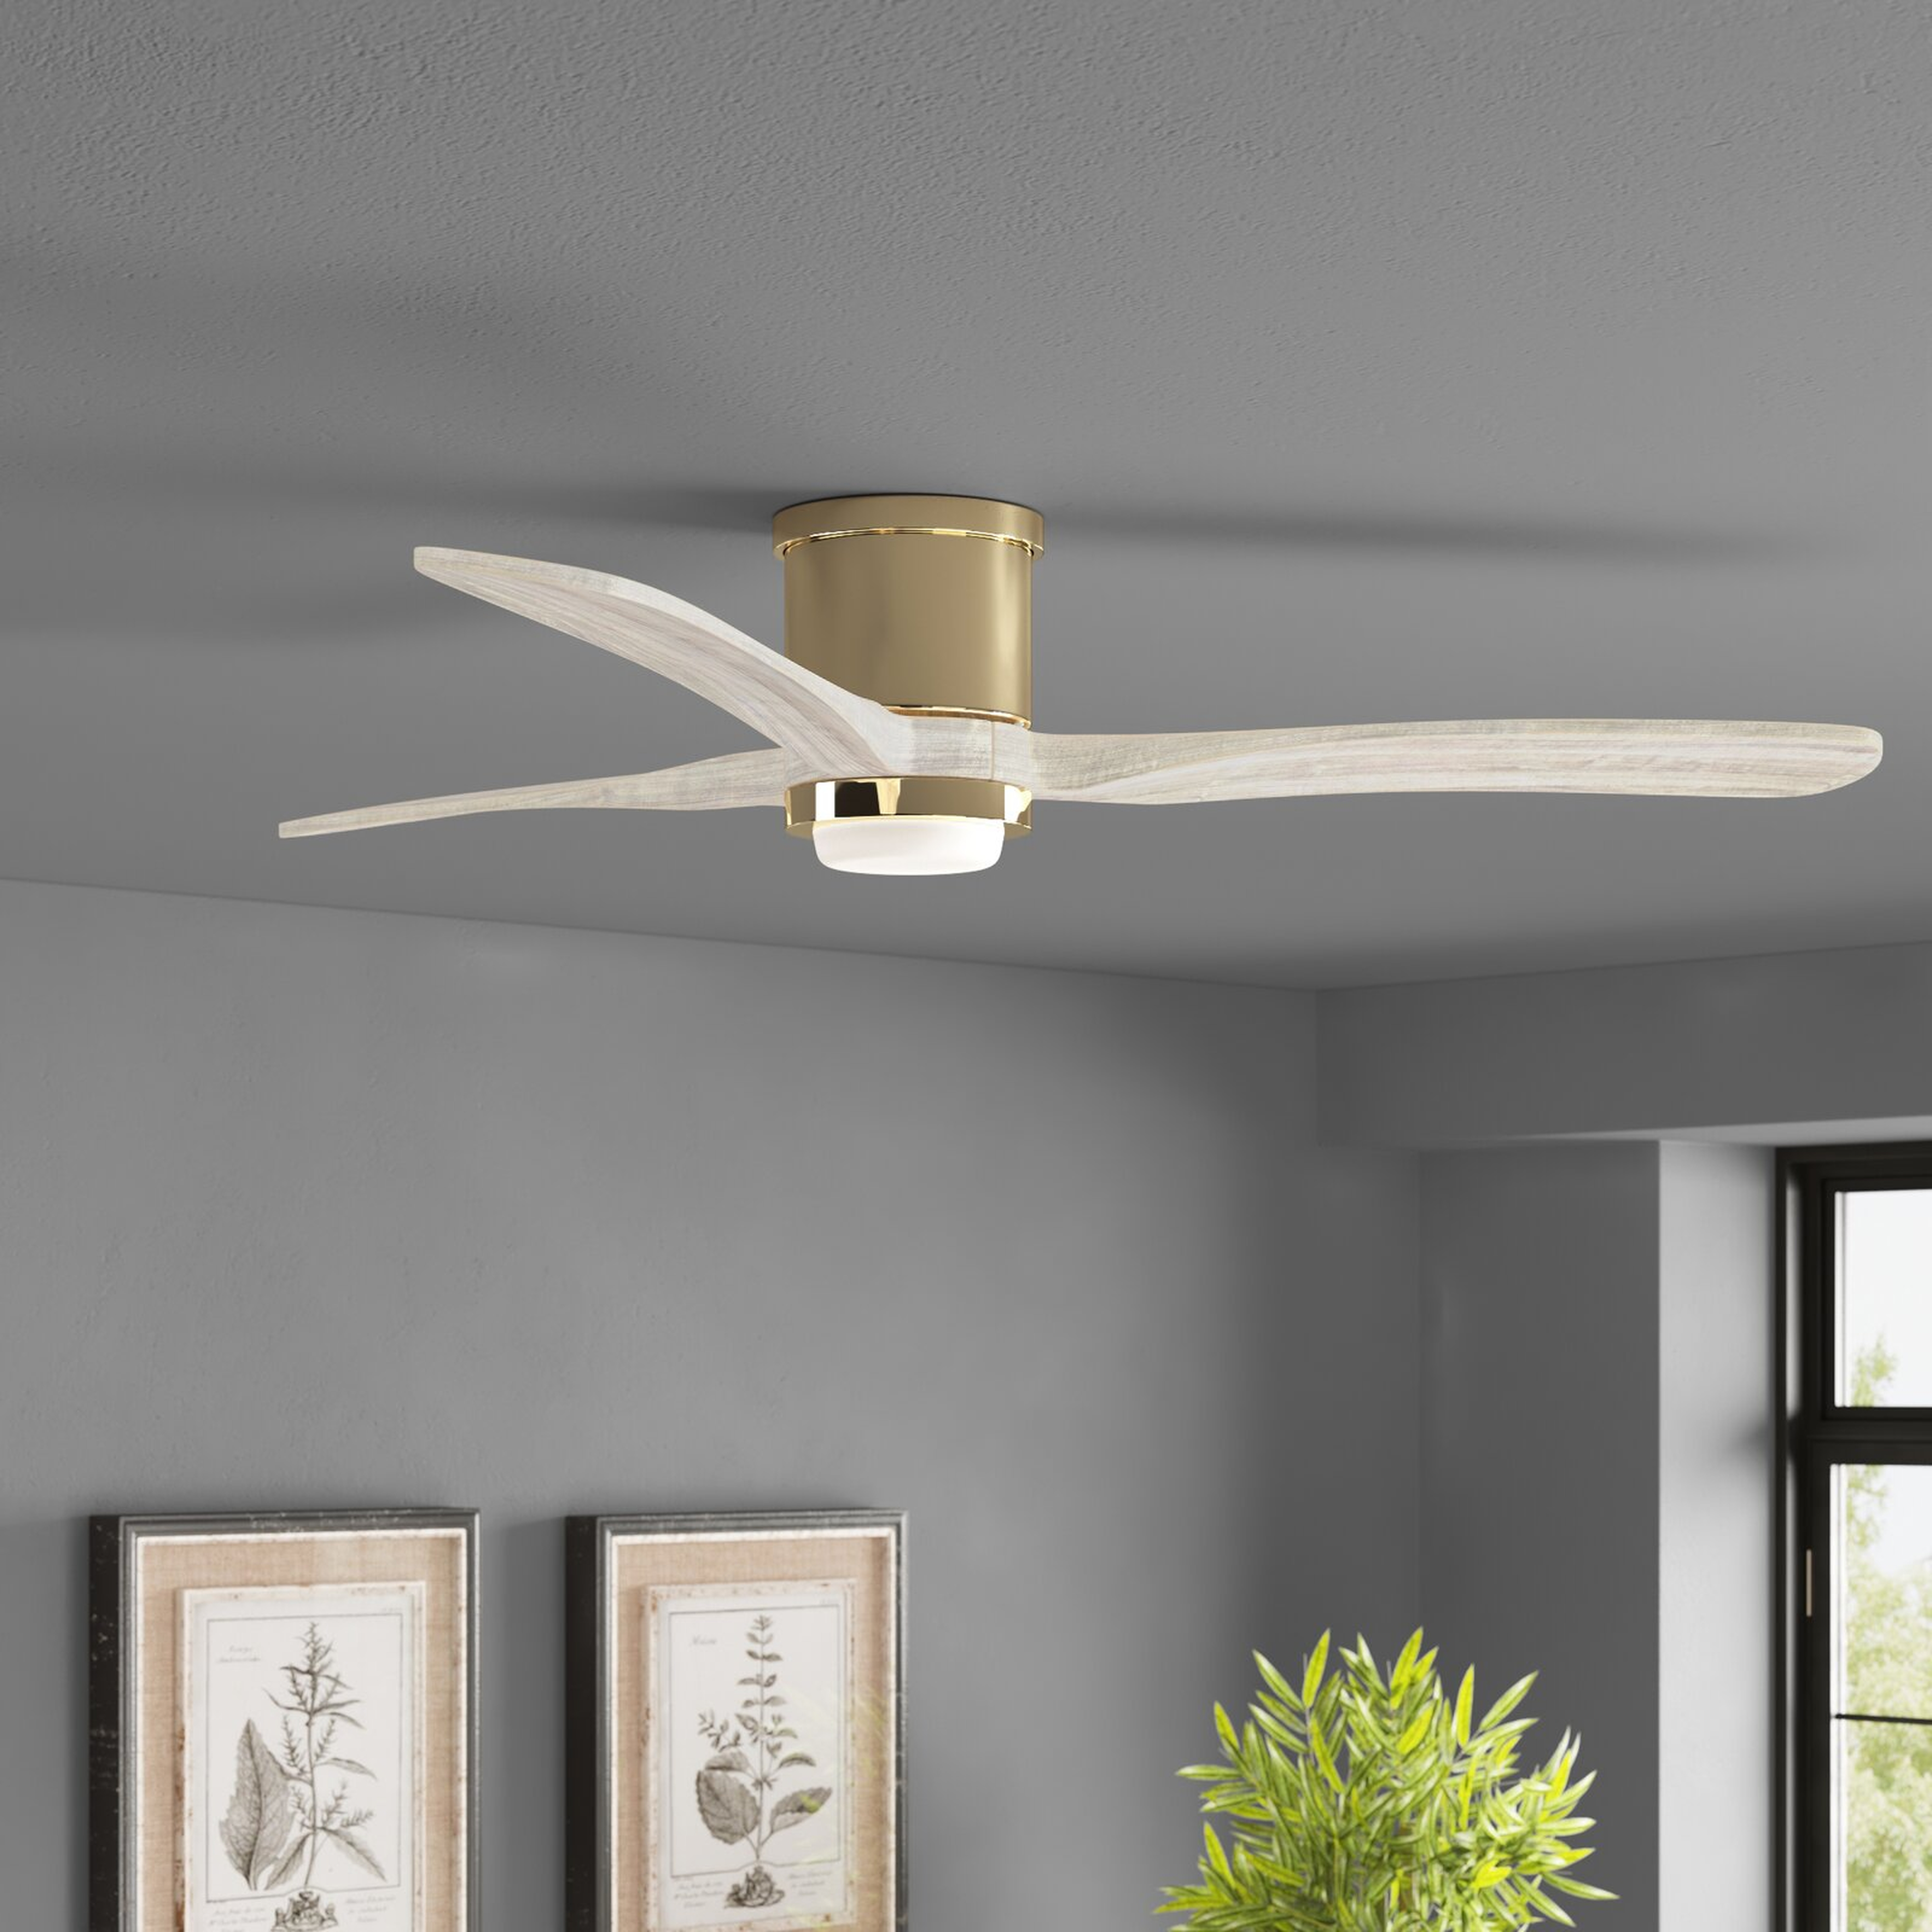 52'' Heatherton 3 - Blade LED Propeller Ceiling Fan with Remote Control and Light Kit Included - Wayfair